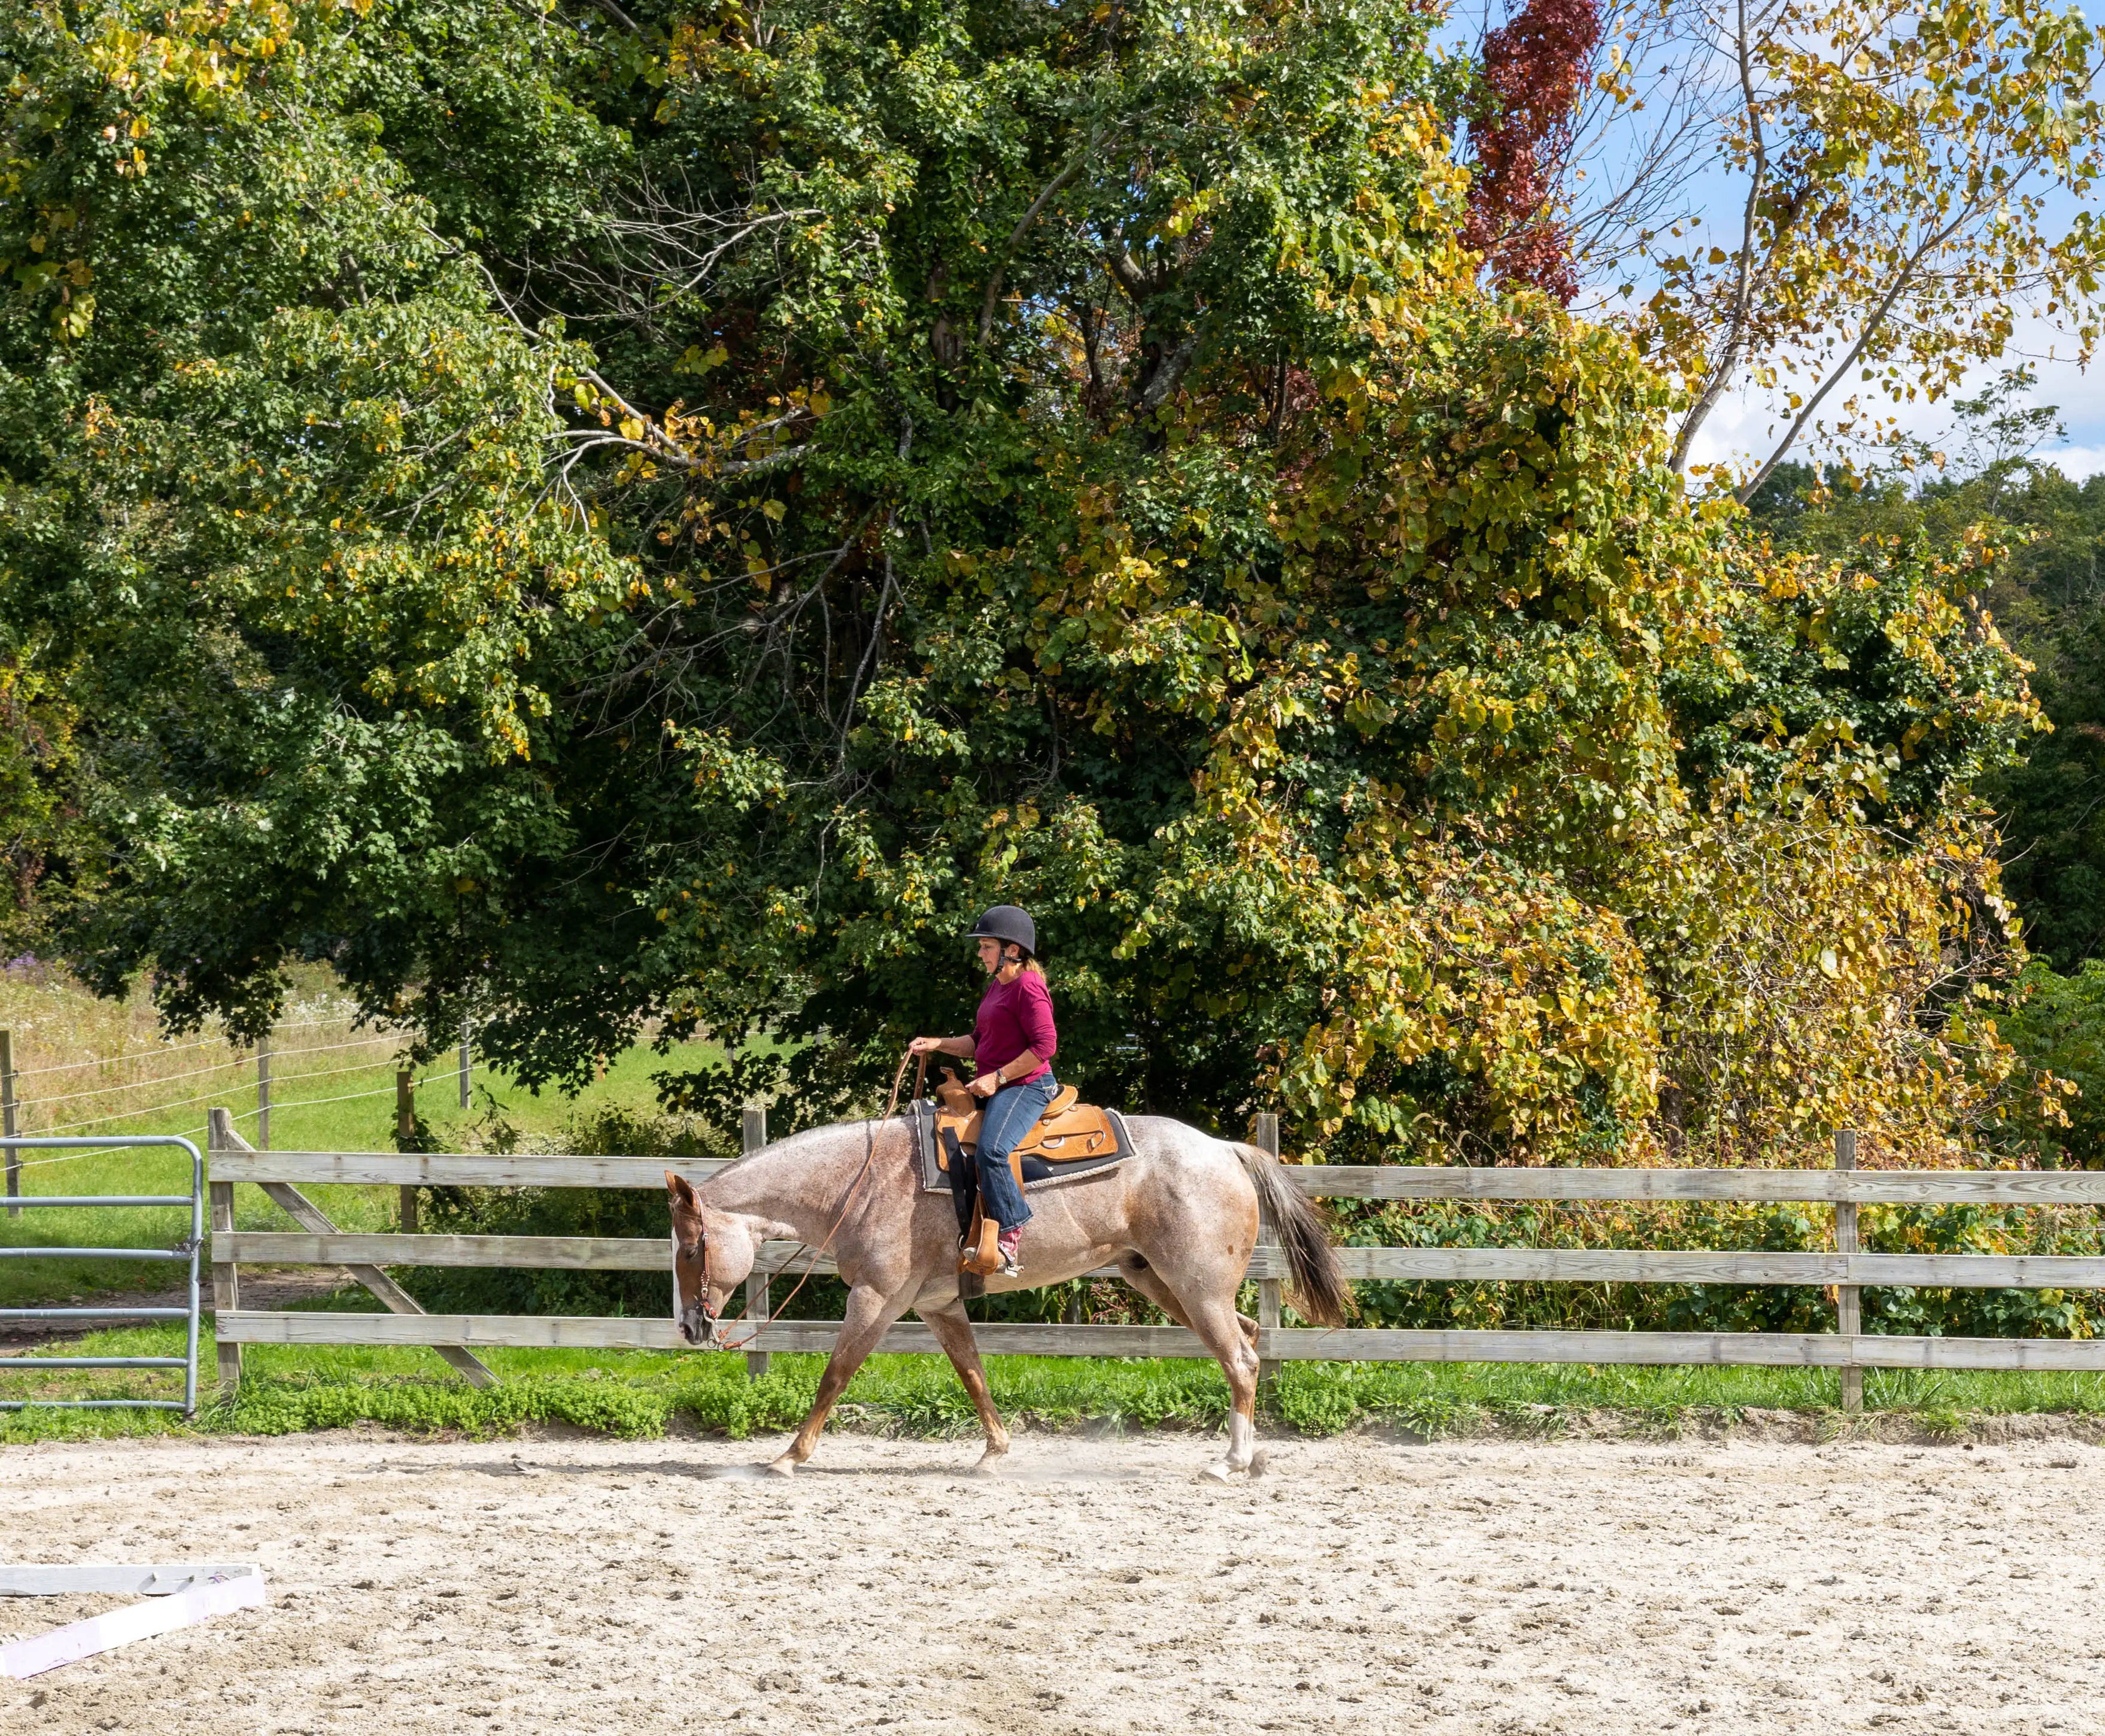 How to decide how often you should take riding lessons by analyzing your goals and budget.